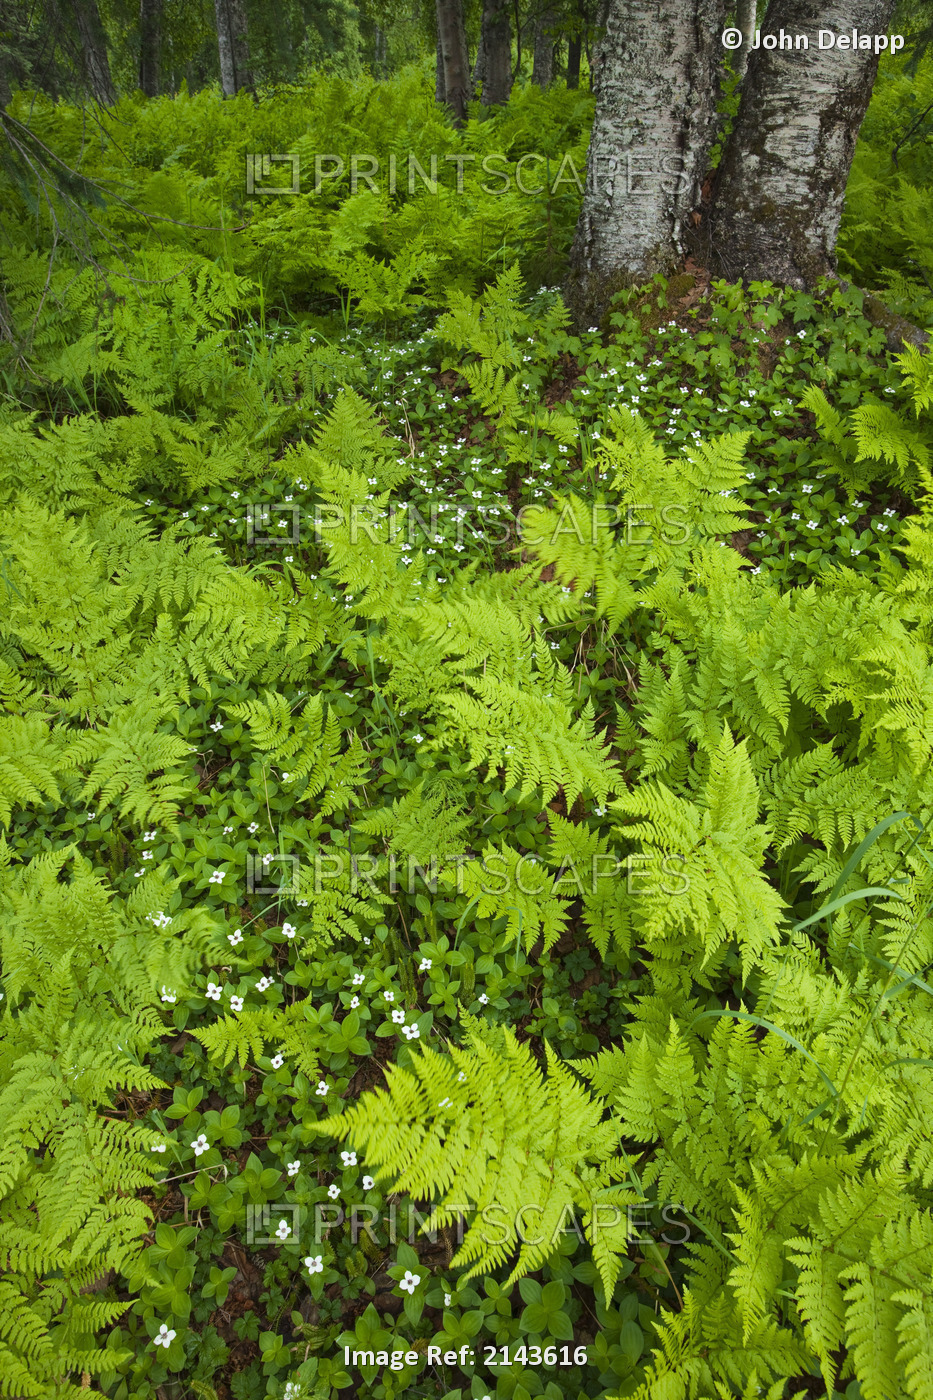 Wood Ferns (Dryopteris Dilatata) And Bunch Berry (Cornus Canadenis) Cover The ...